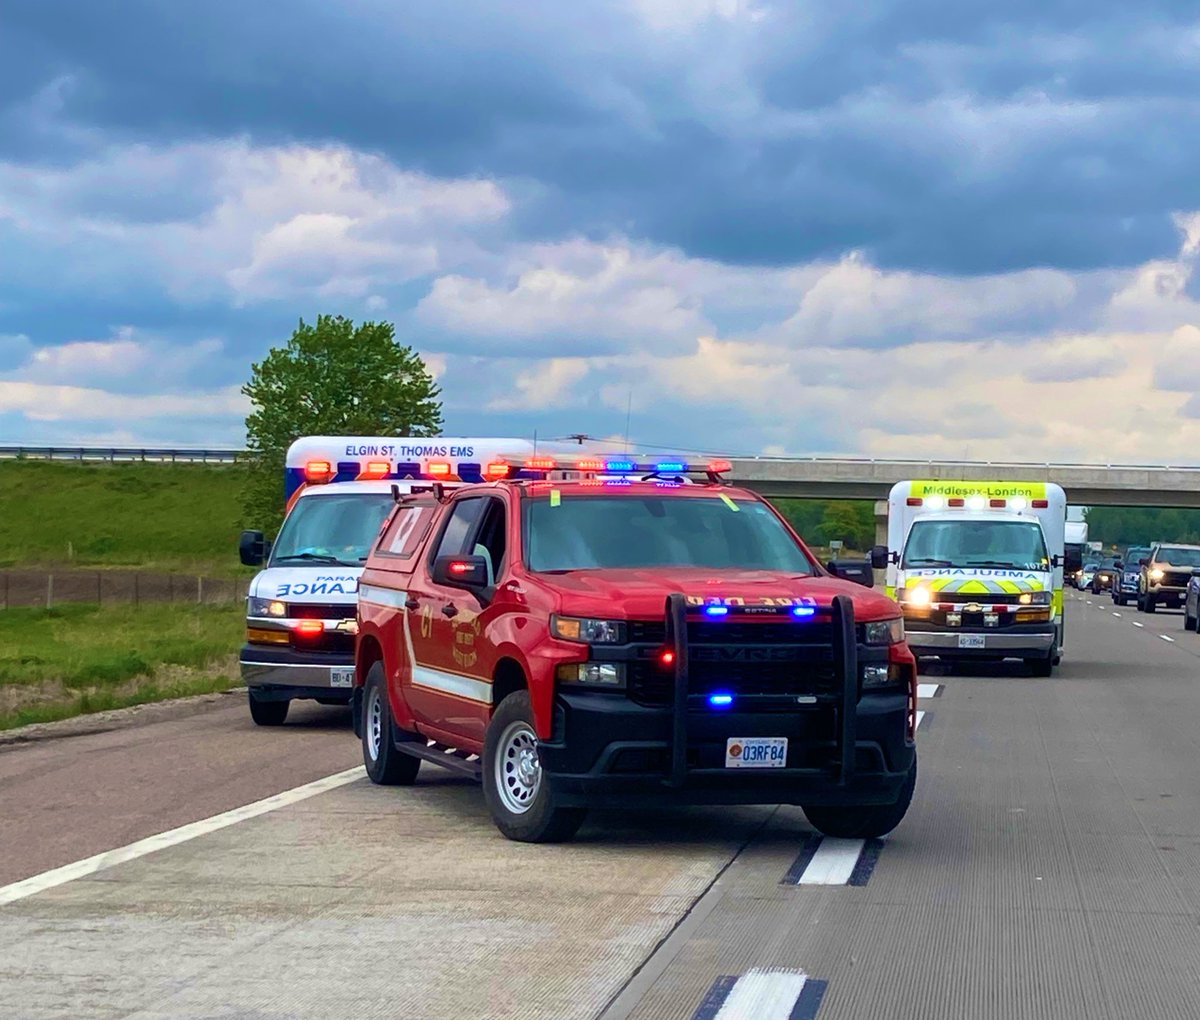 @SouthwoldFire on scene with @OPP_WR on #Hwy401 WB MM164, just past Union Rd @TwpofSouthwold for a 2-vehicle #MVC. @MedavieElginEMS, @MLPS911, & #OneidaEMS attended to assess patients. 1 lane is currently blocked.